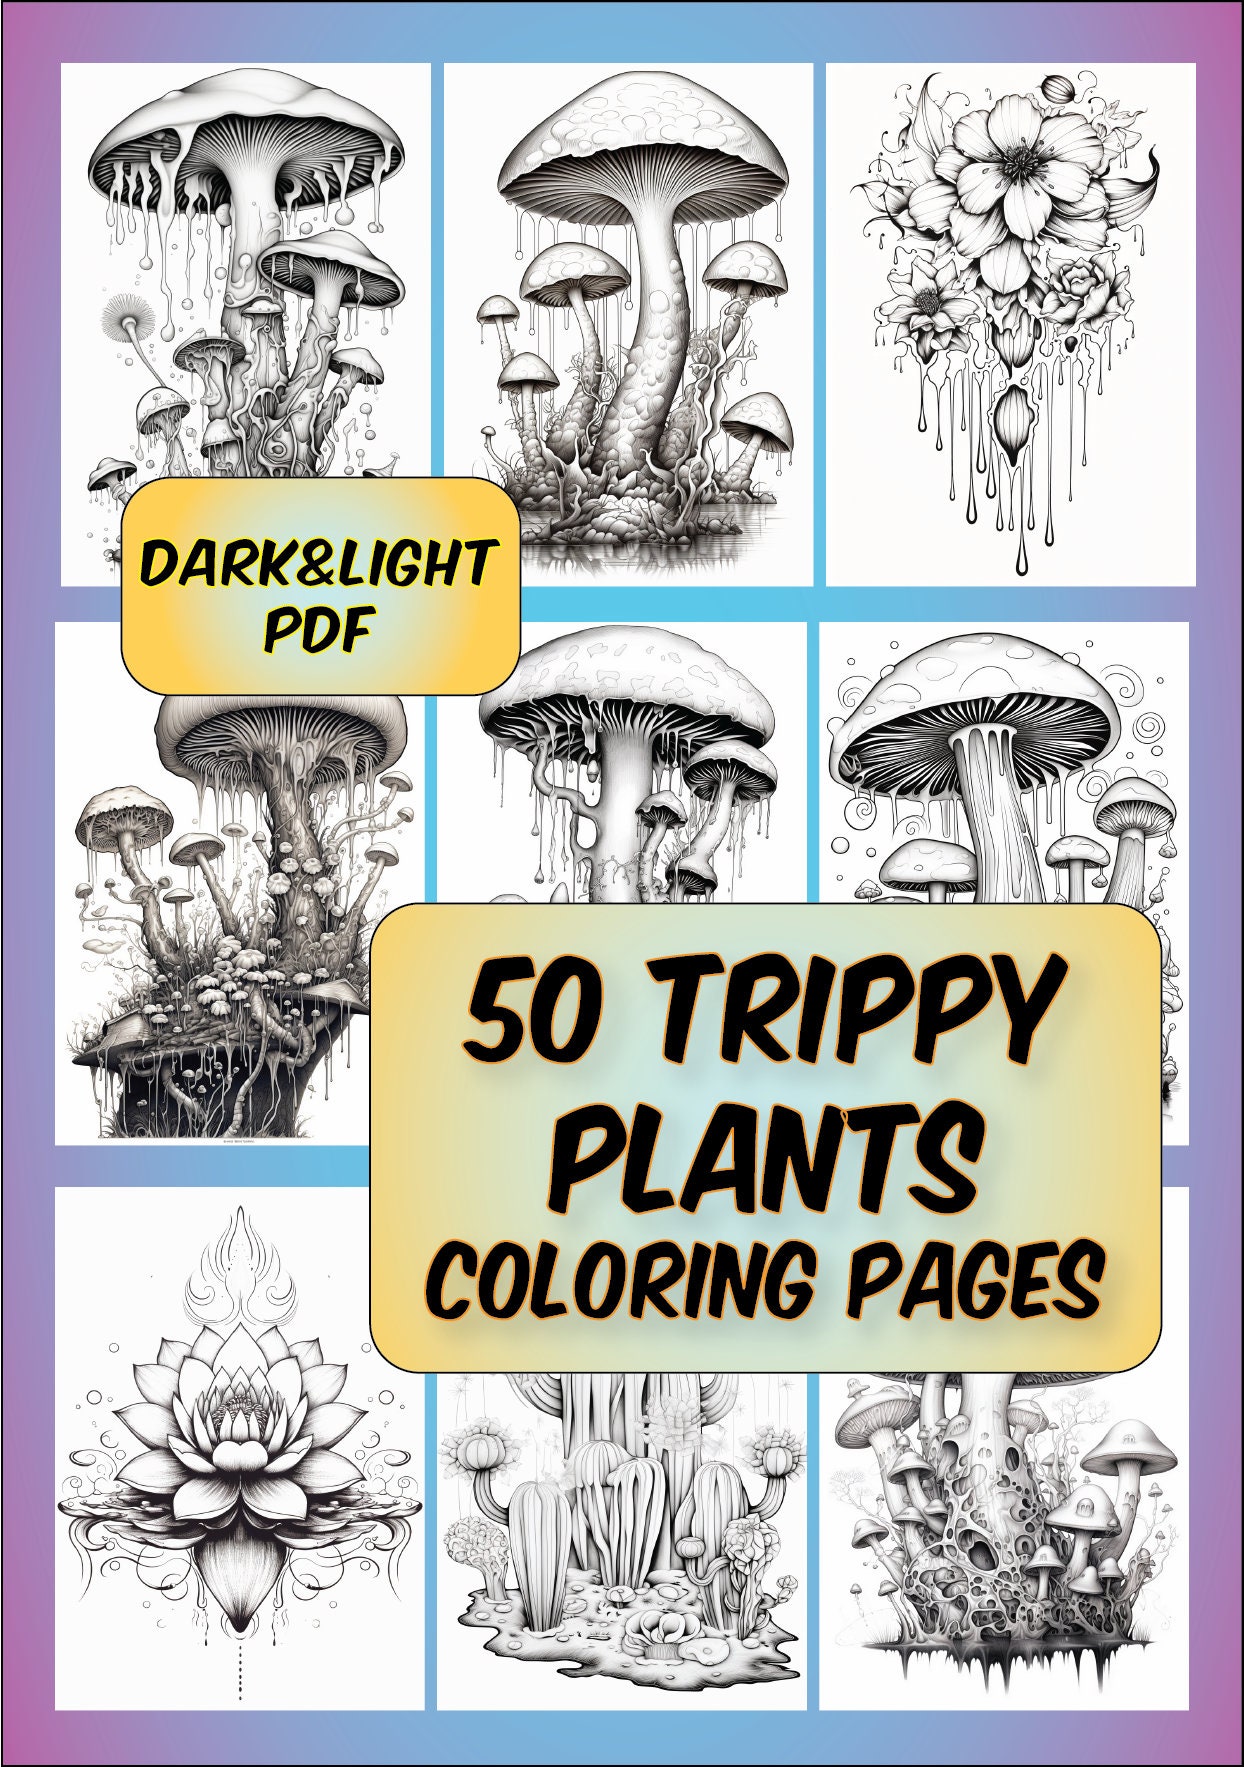 Stoner Coloring Book for Adults fun Coloring Pages With Trippy &  Psychedelic Designs /28 Coloring Pages /PDF Printable Download 